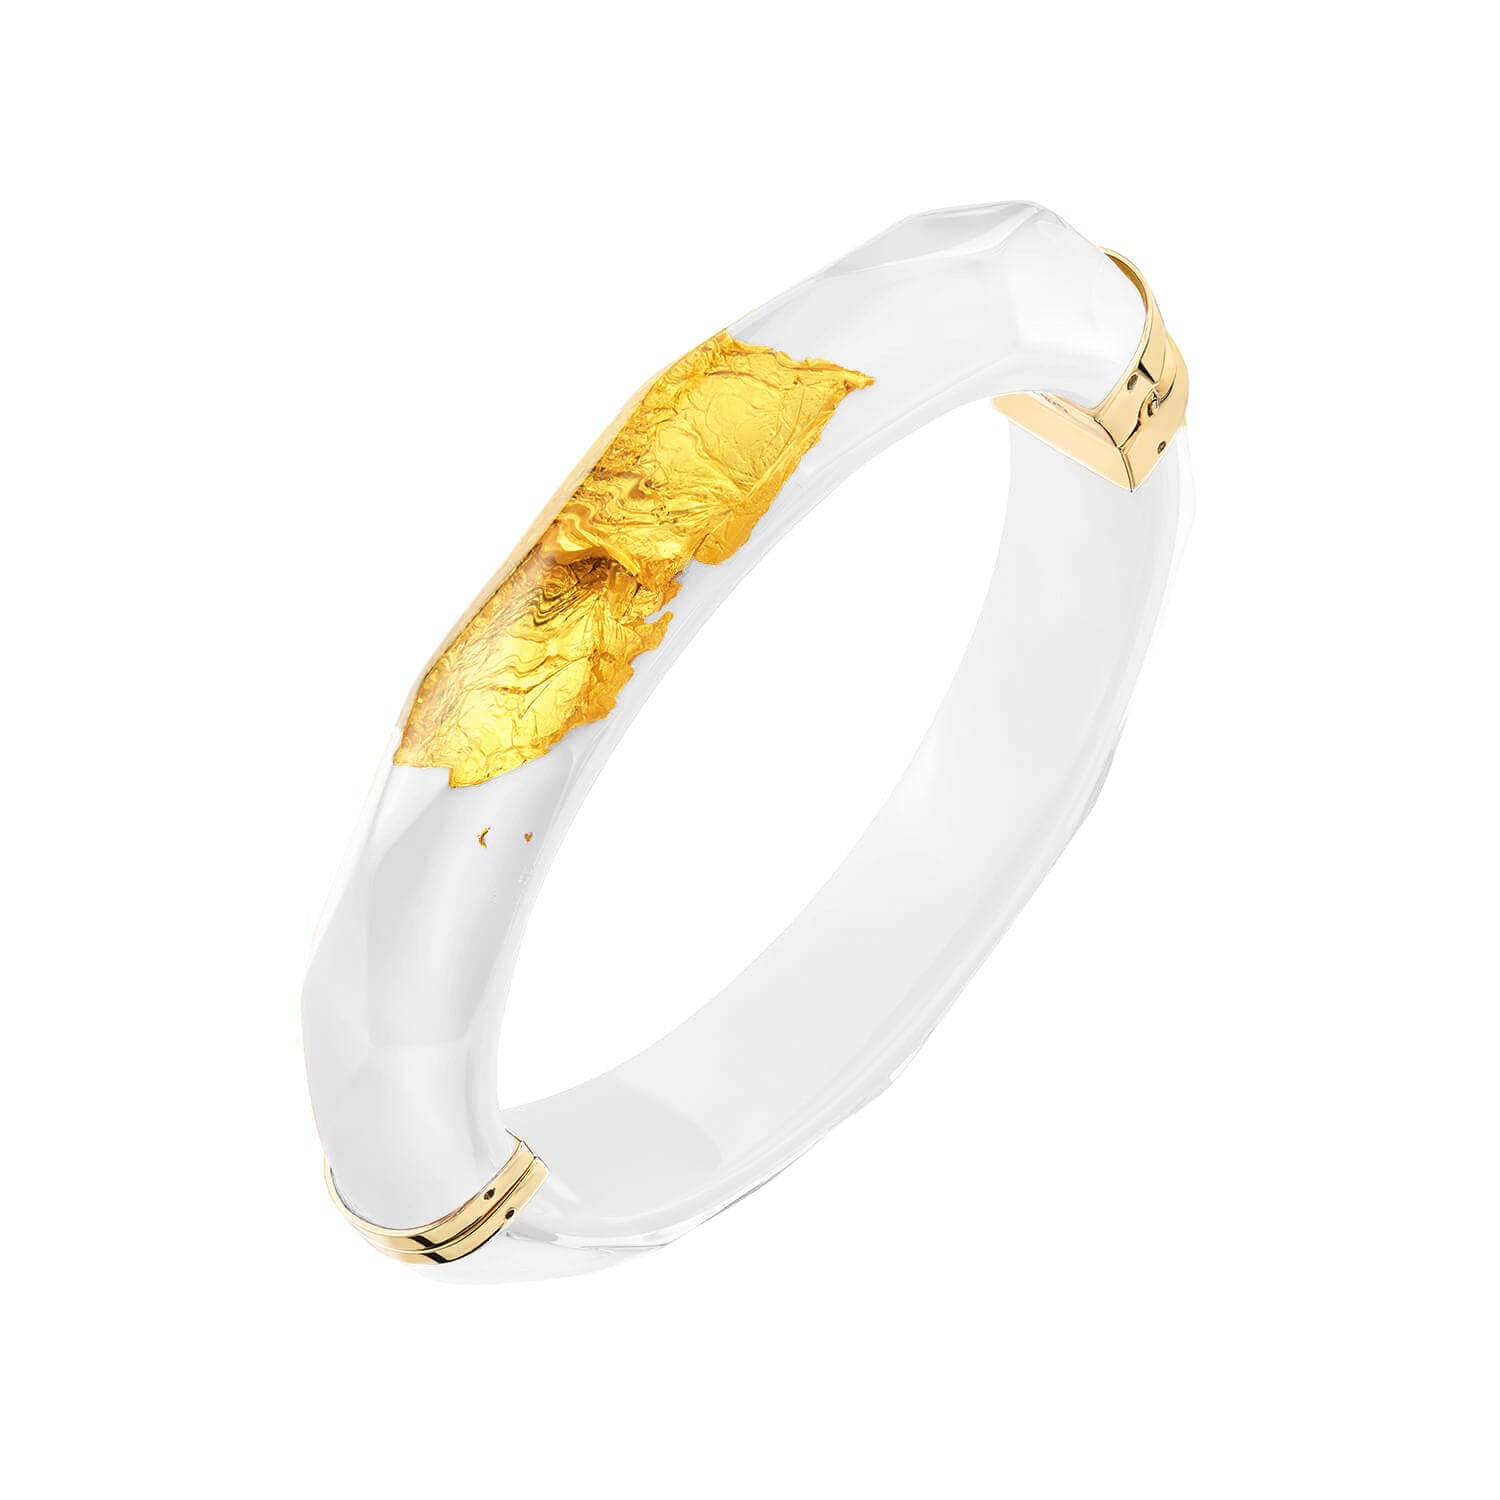 Clear Faceted Lucite Bangle with Gold Beads